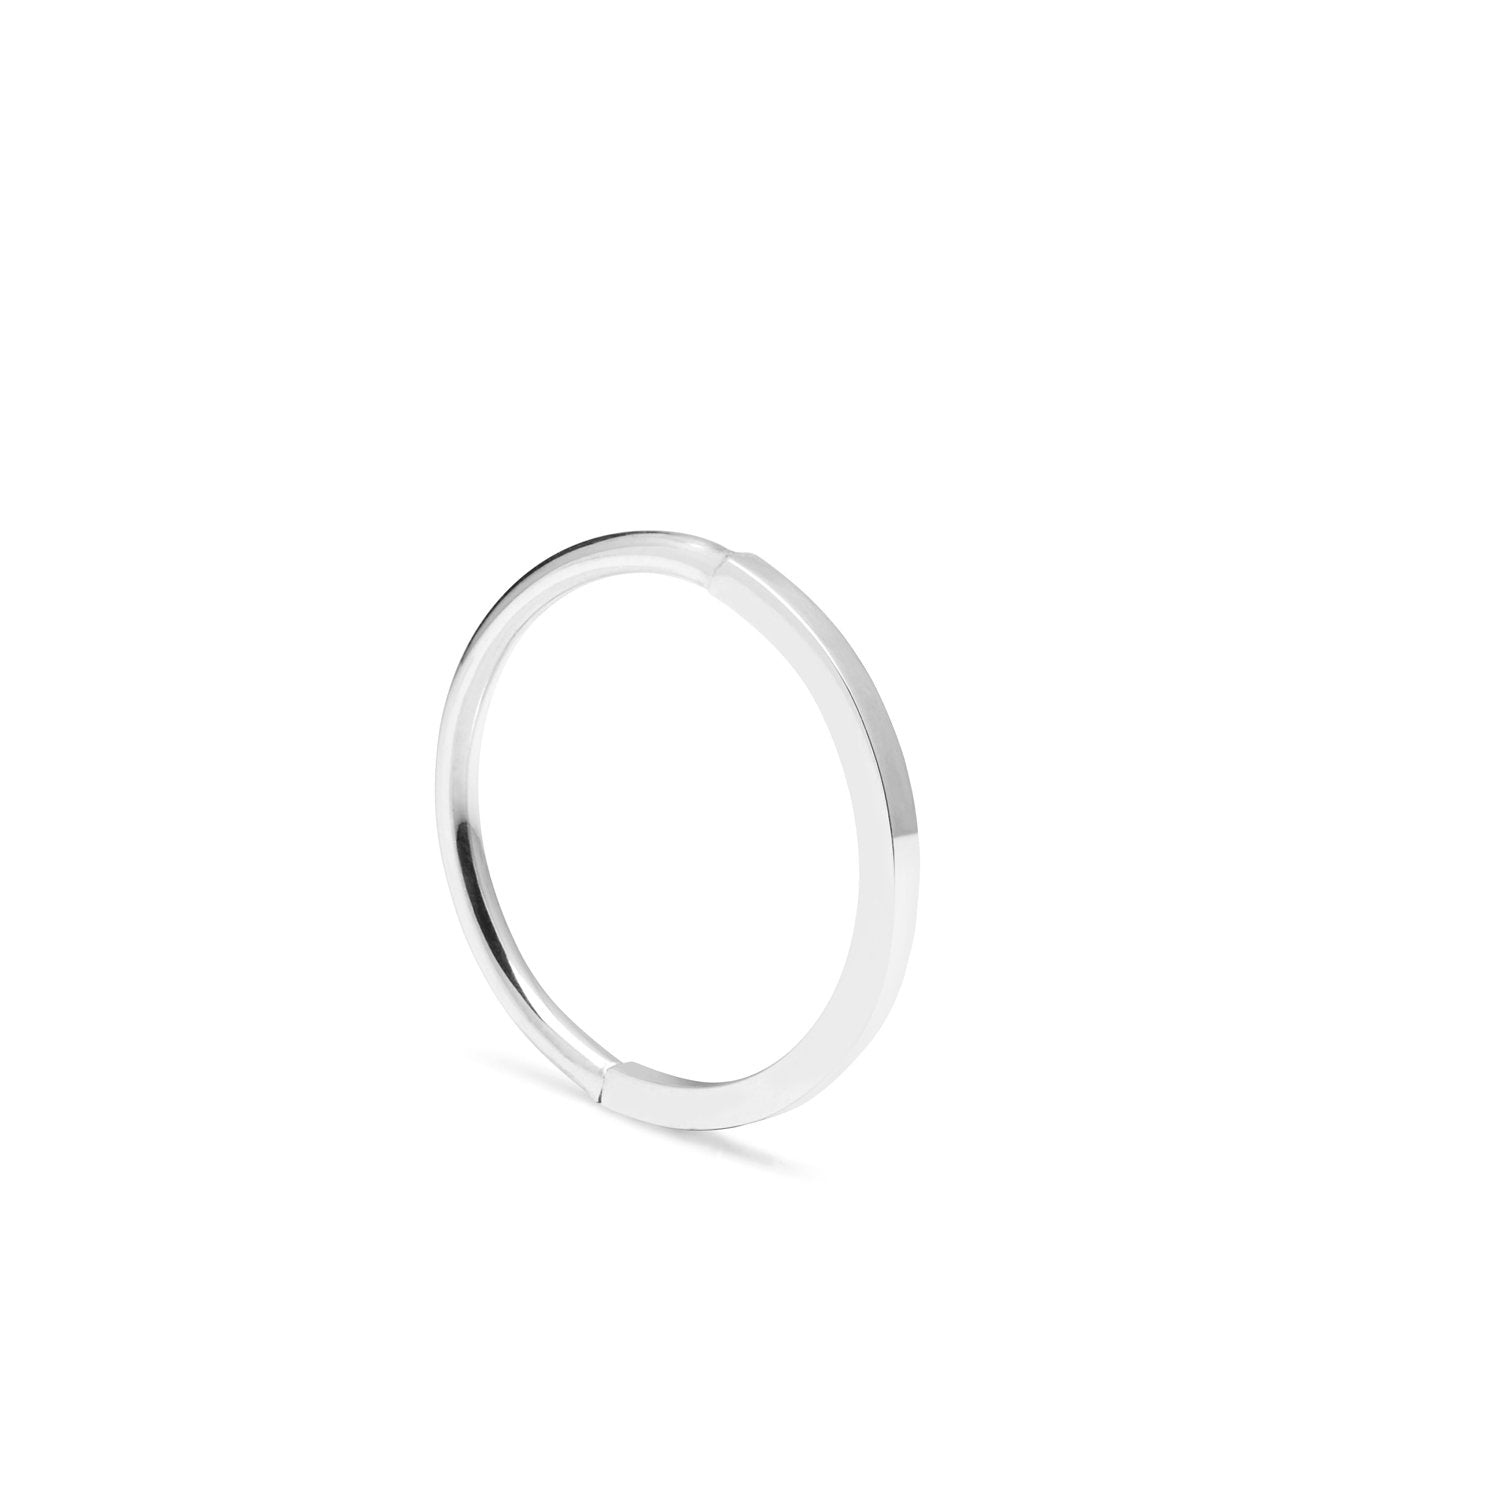 Paradox Ring - Silver - Myia Bonner Jewellery